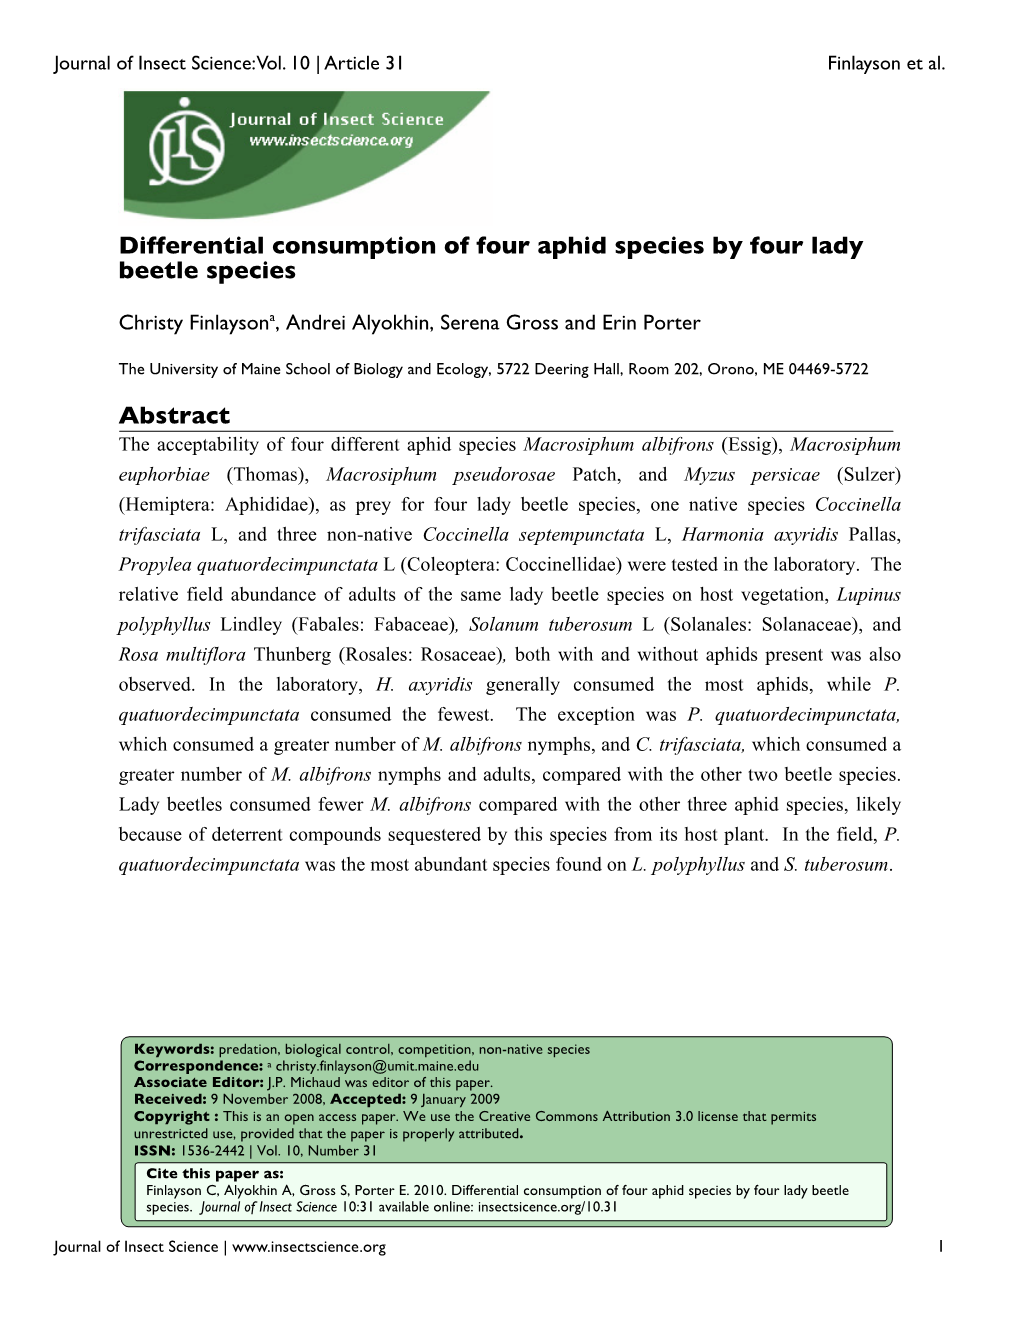 Differential Consumption of Four Aphid Species by Four Lady Beetle Species Abstract